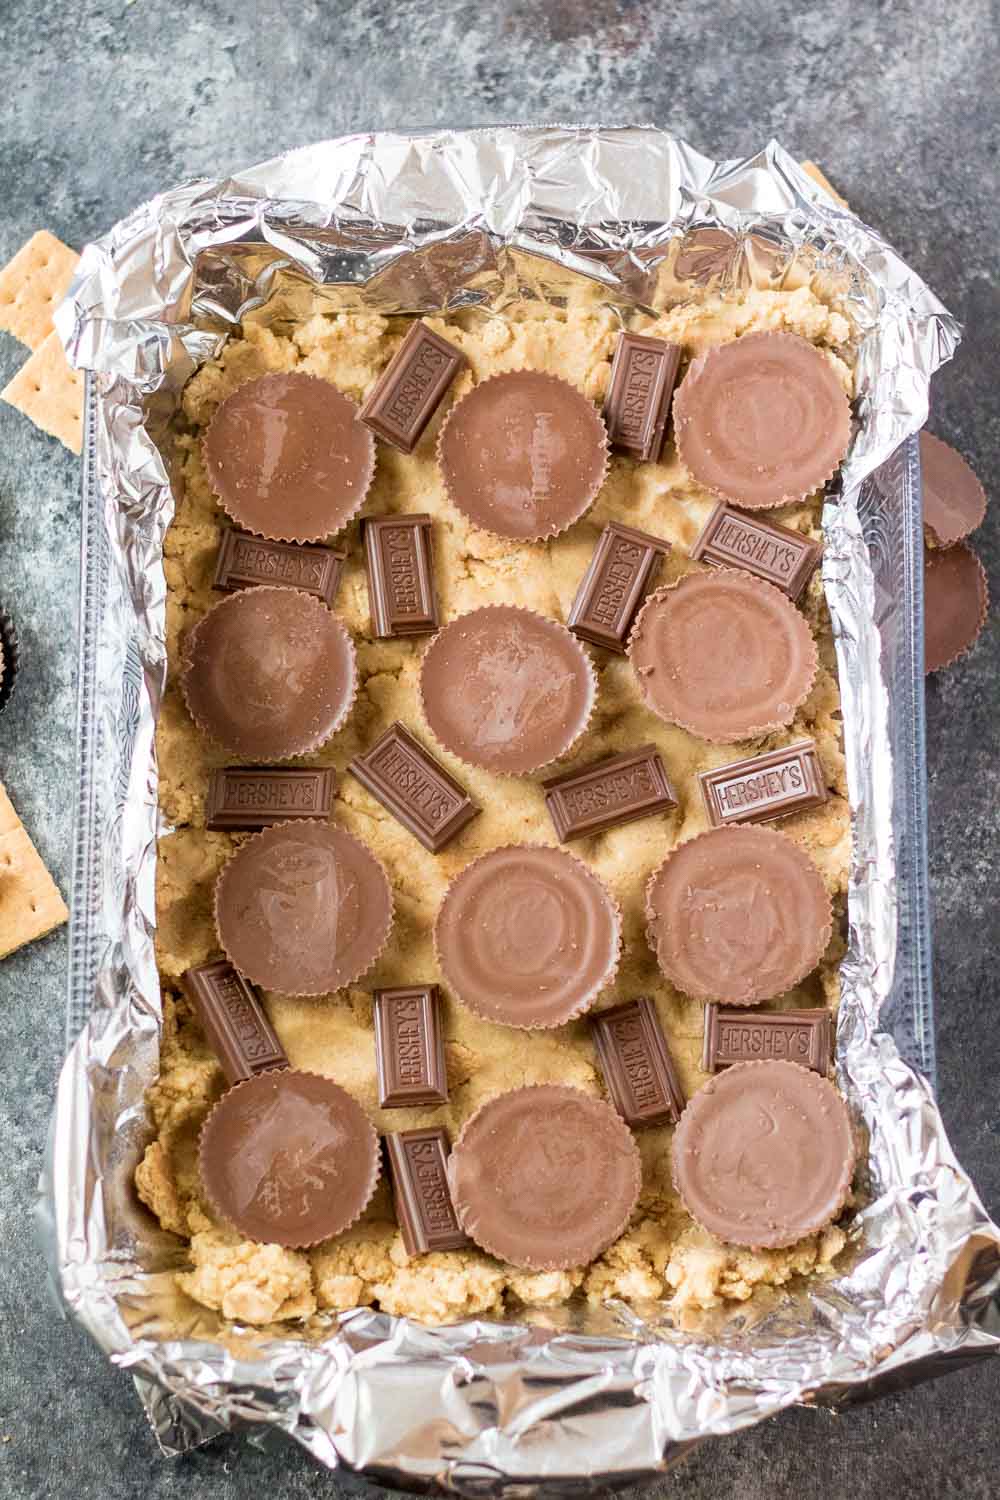 Peanut butter cup and Hershey chocolate pieces on top of a smore bar crust in a baking dish